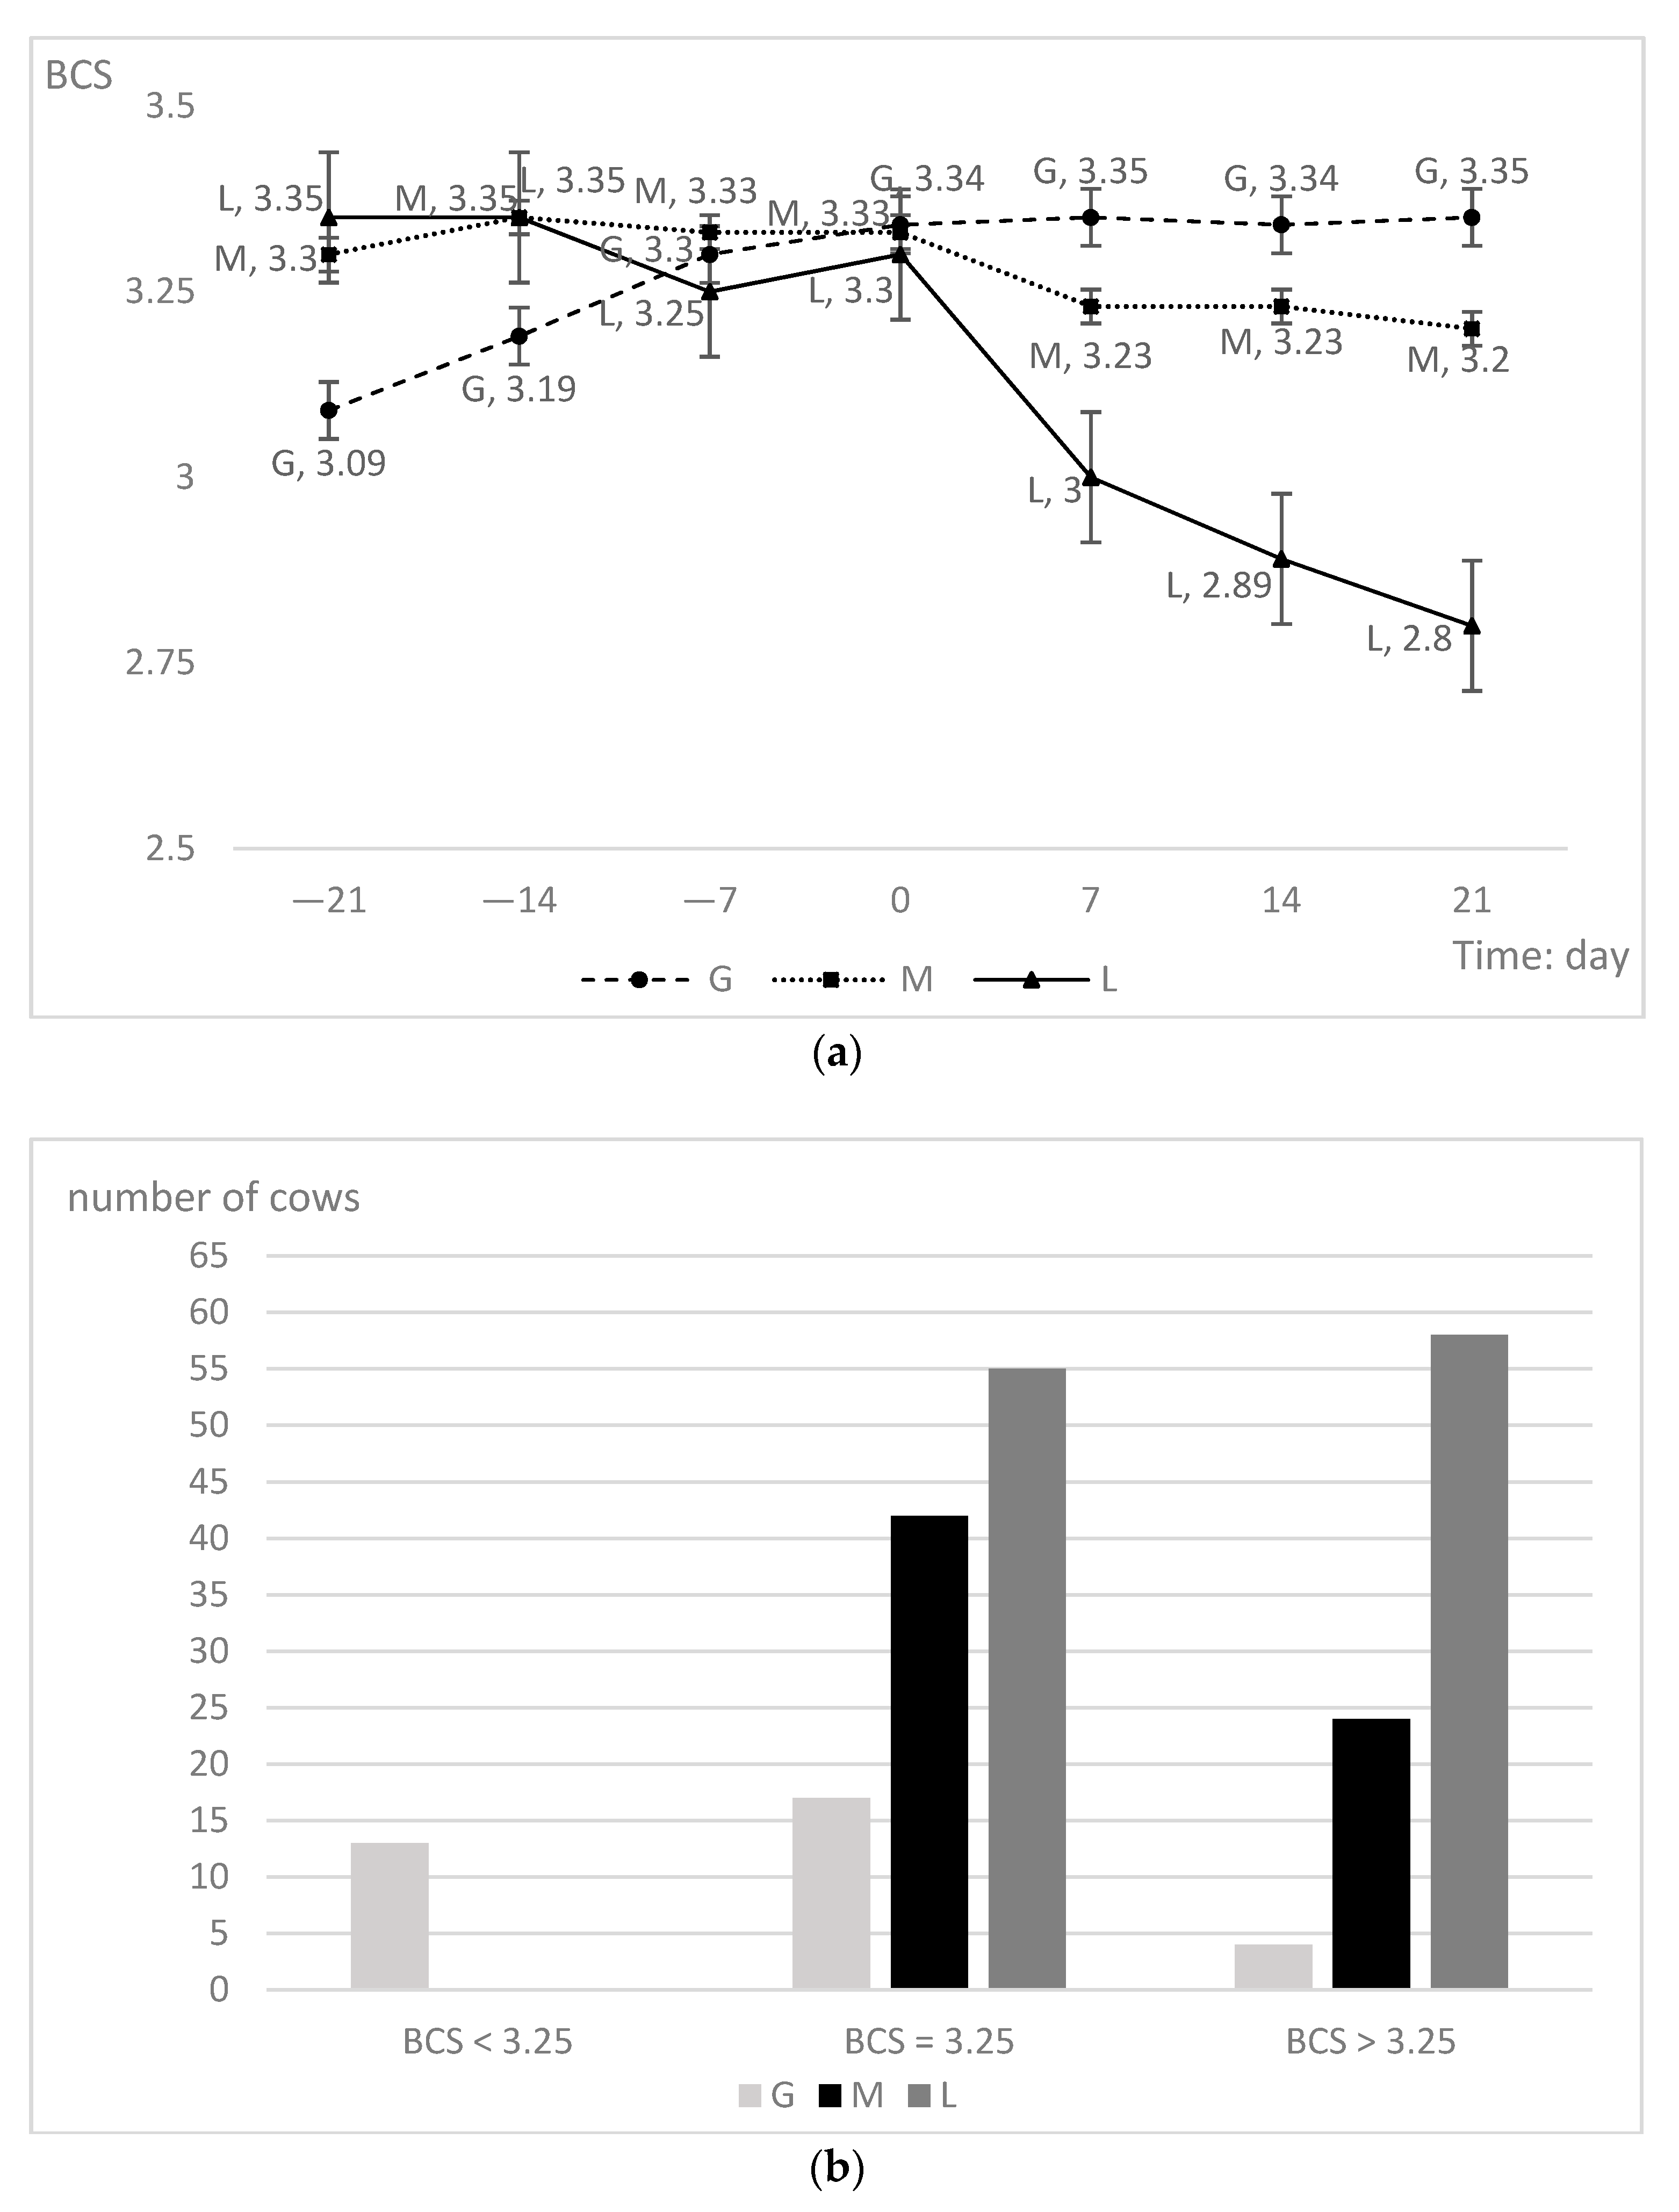 Vaginal discharge scoring system for postpartum dairy cows. (A) Clear